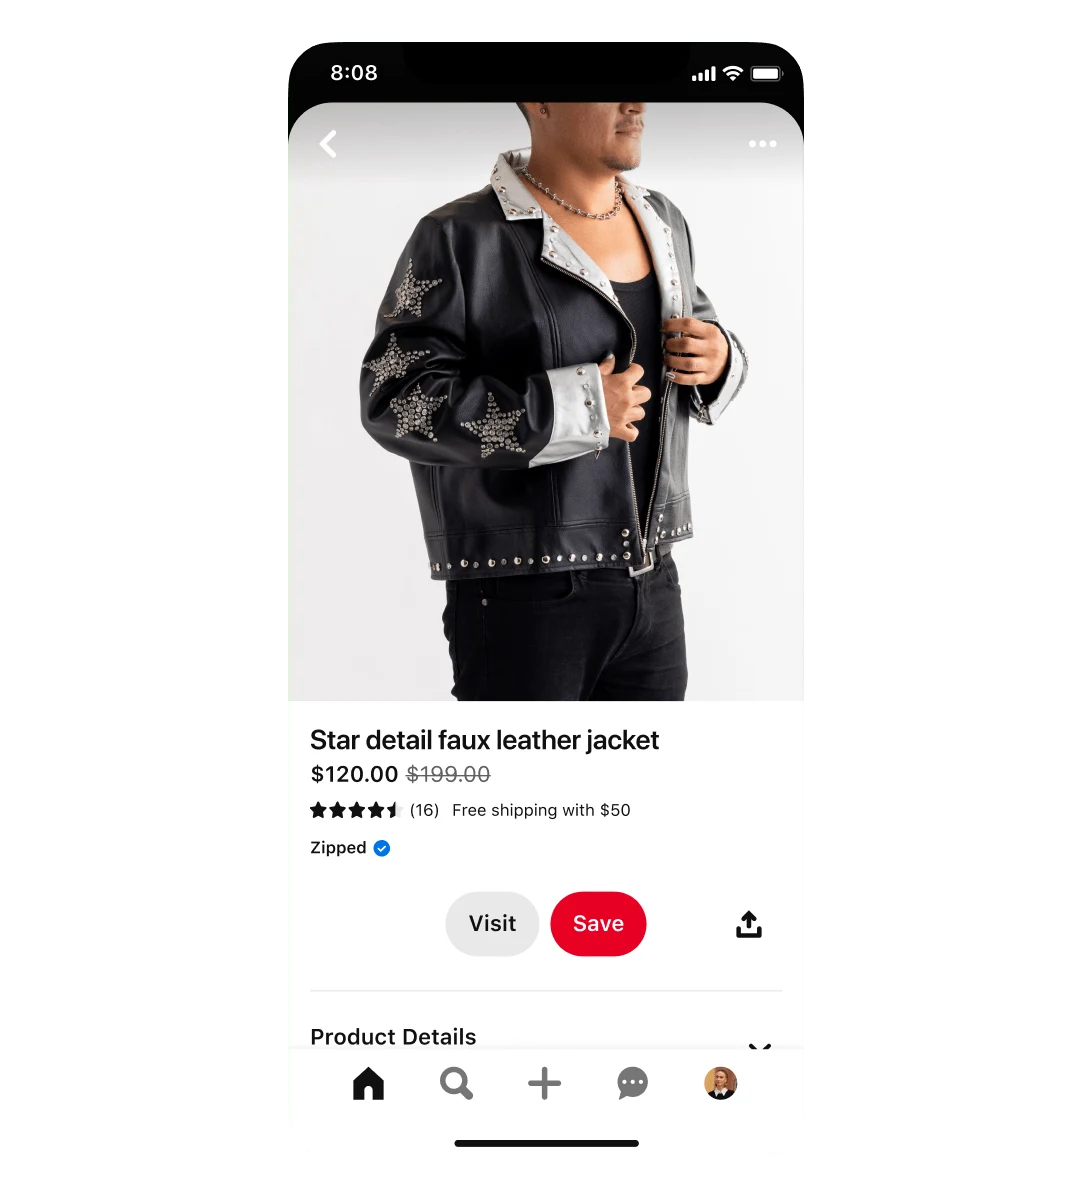 Mobile view of a Shopping ad for a faux leather jacket  with star detail. The jacket is on sale for $120, marked down from $199. The ad features a man wearing the jacket.